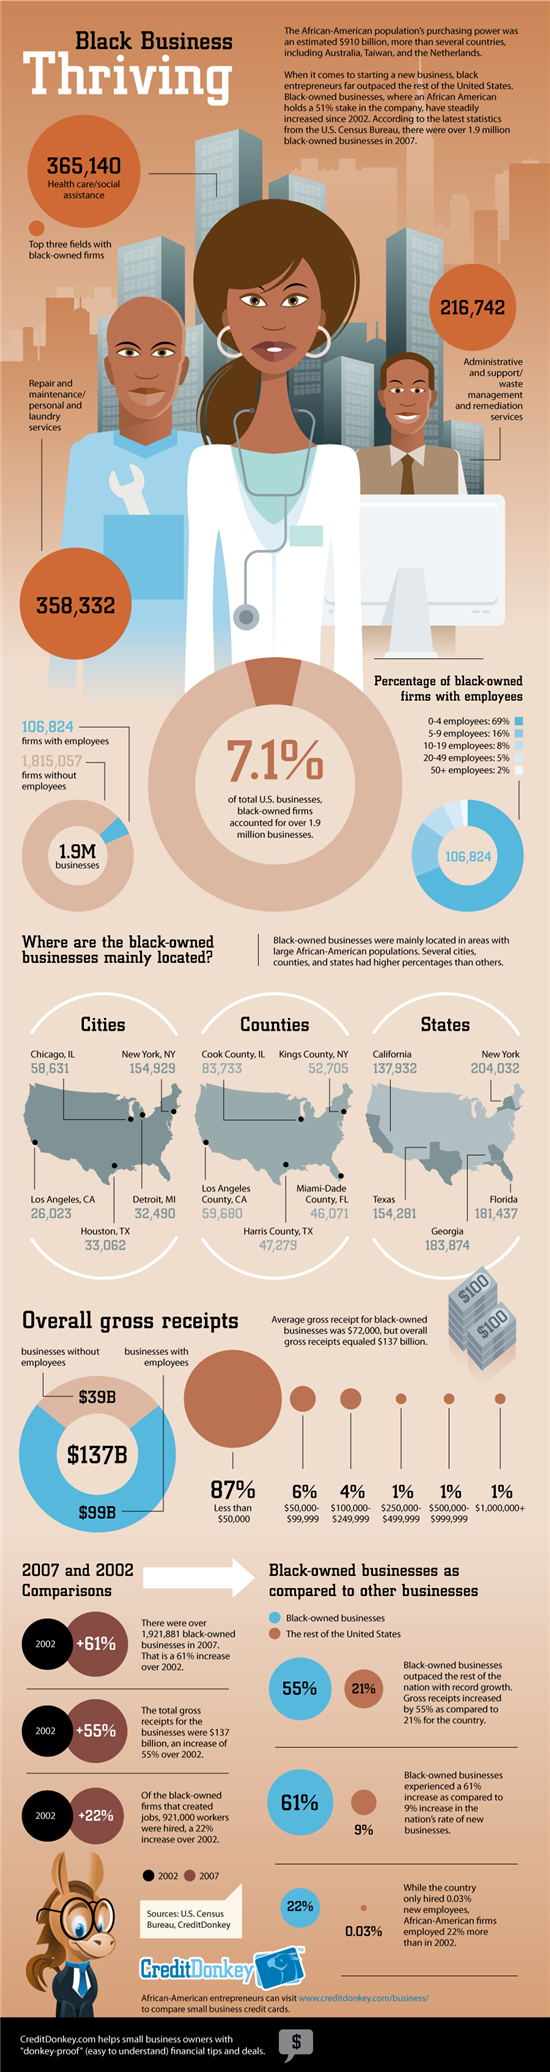 Infographic: Black Business Thriving